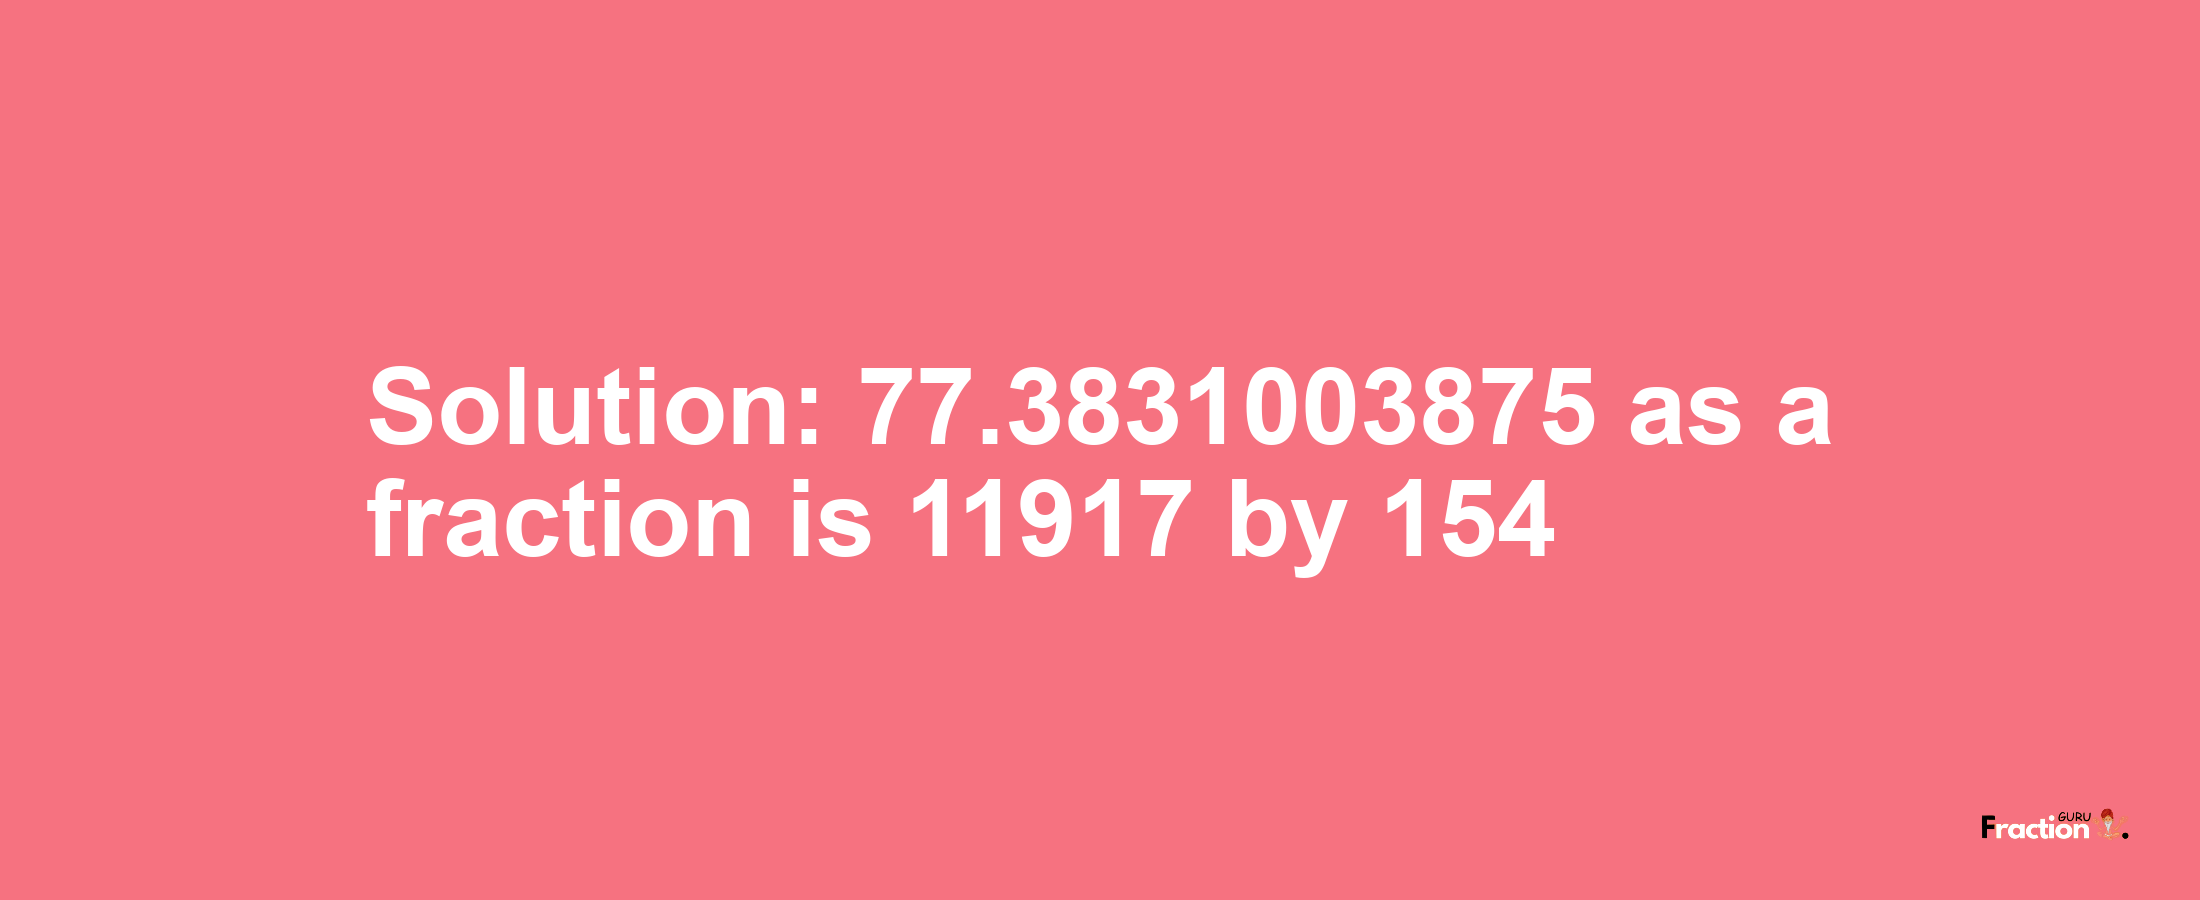 Solution:77.3831003875 as a fraction is 11917/154